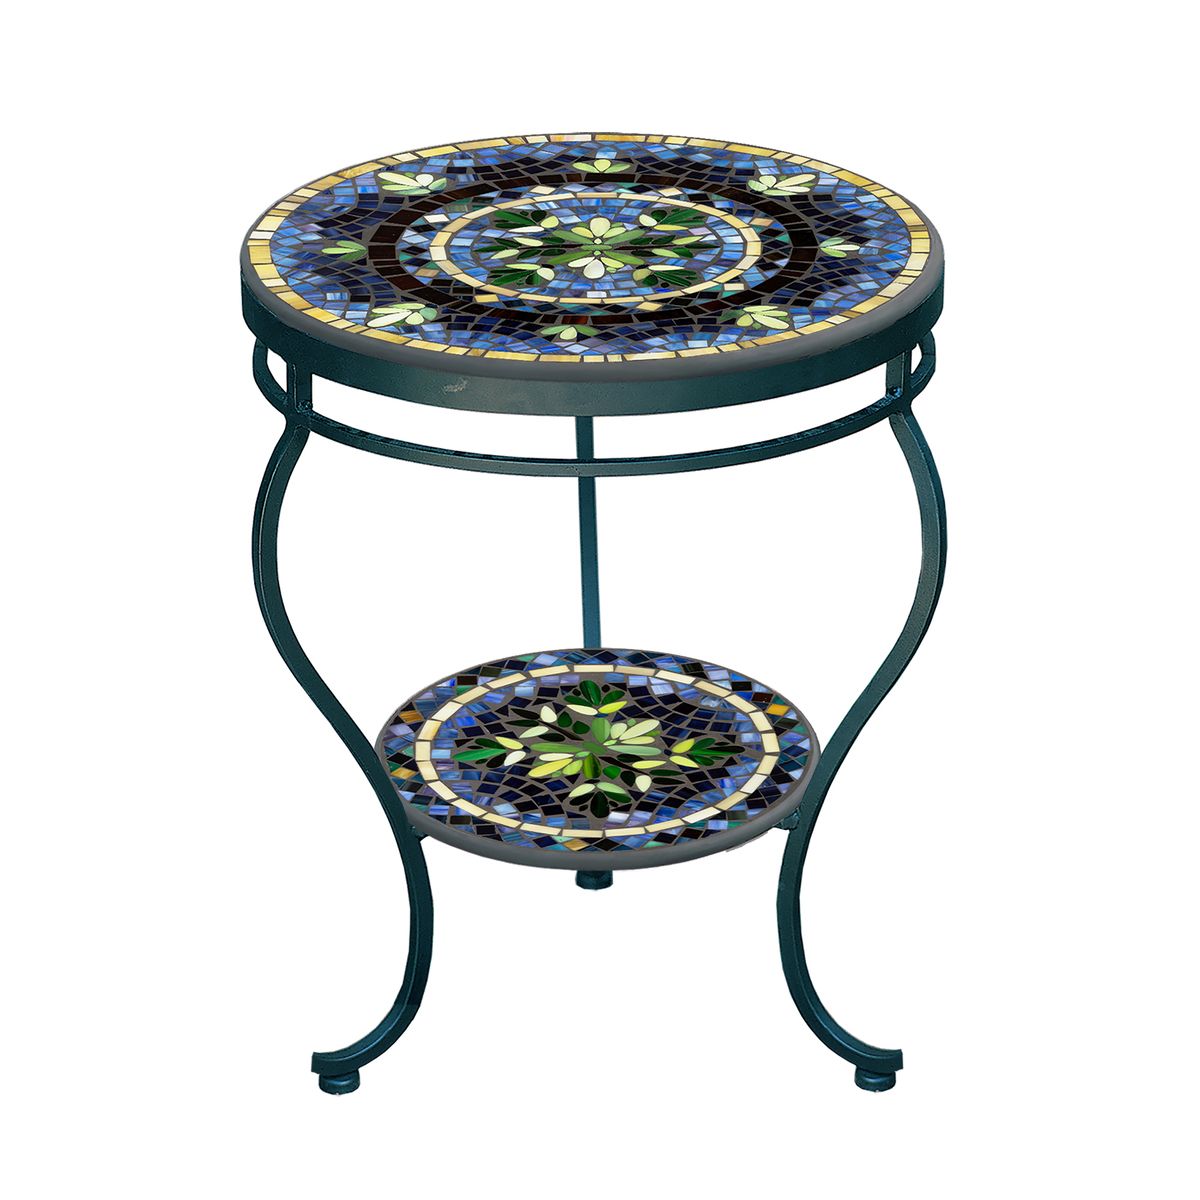 Lake Como Mosaic Side Table - Tiered-Iron Accents